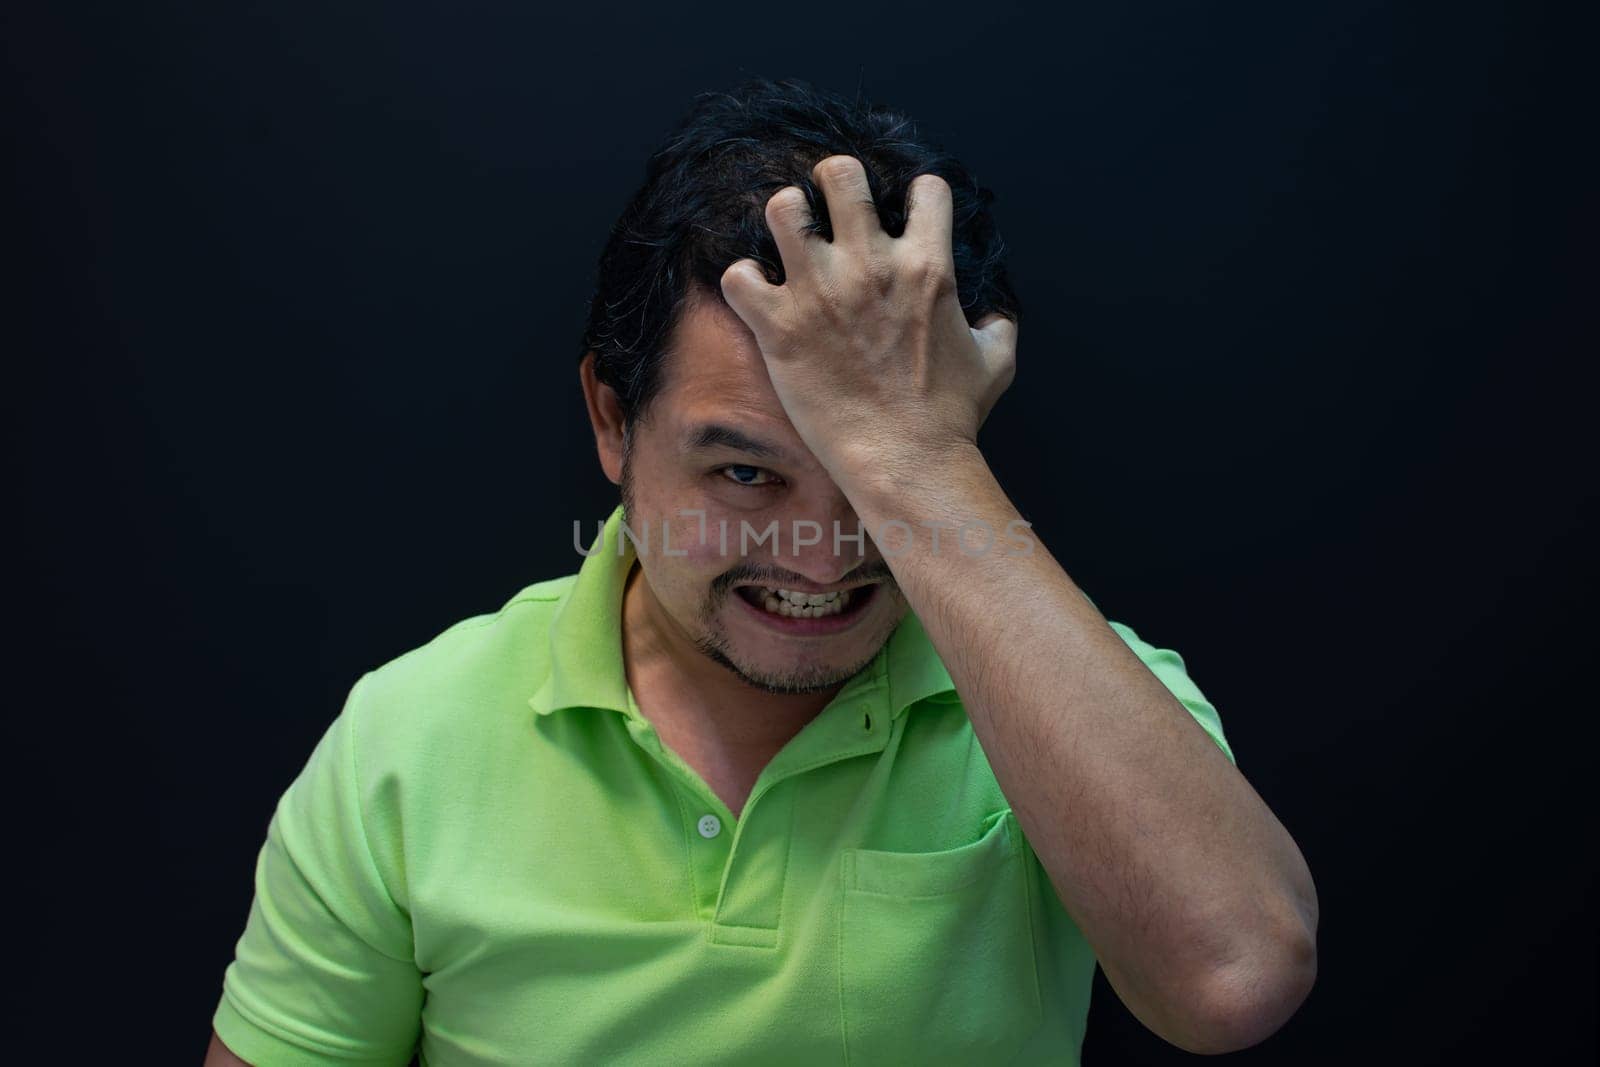 Asian man 40s strain have a anger unhappy gesture with stressed and problems concept on black background dark style